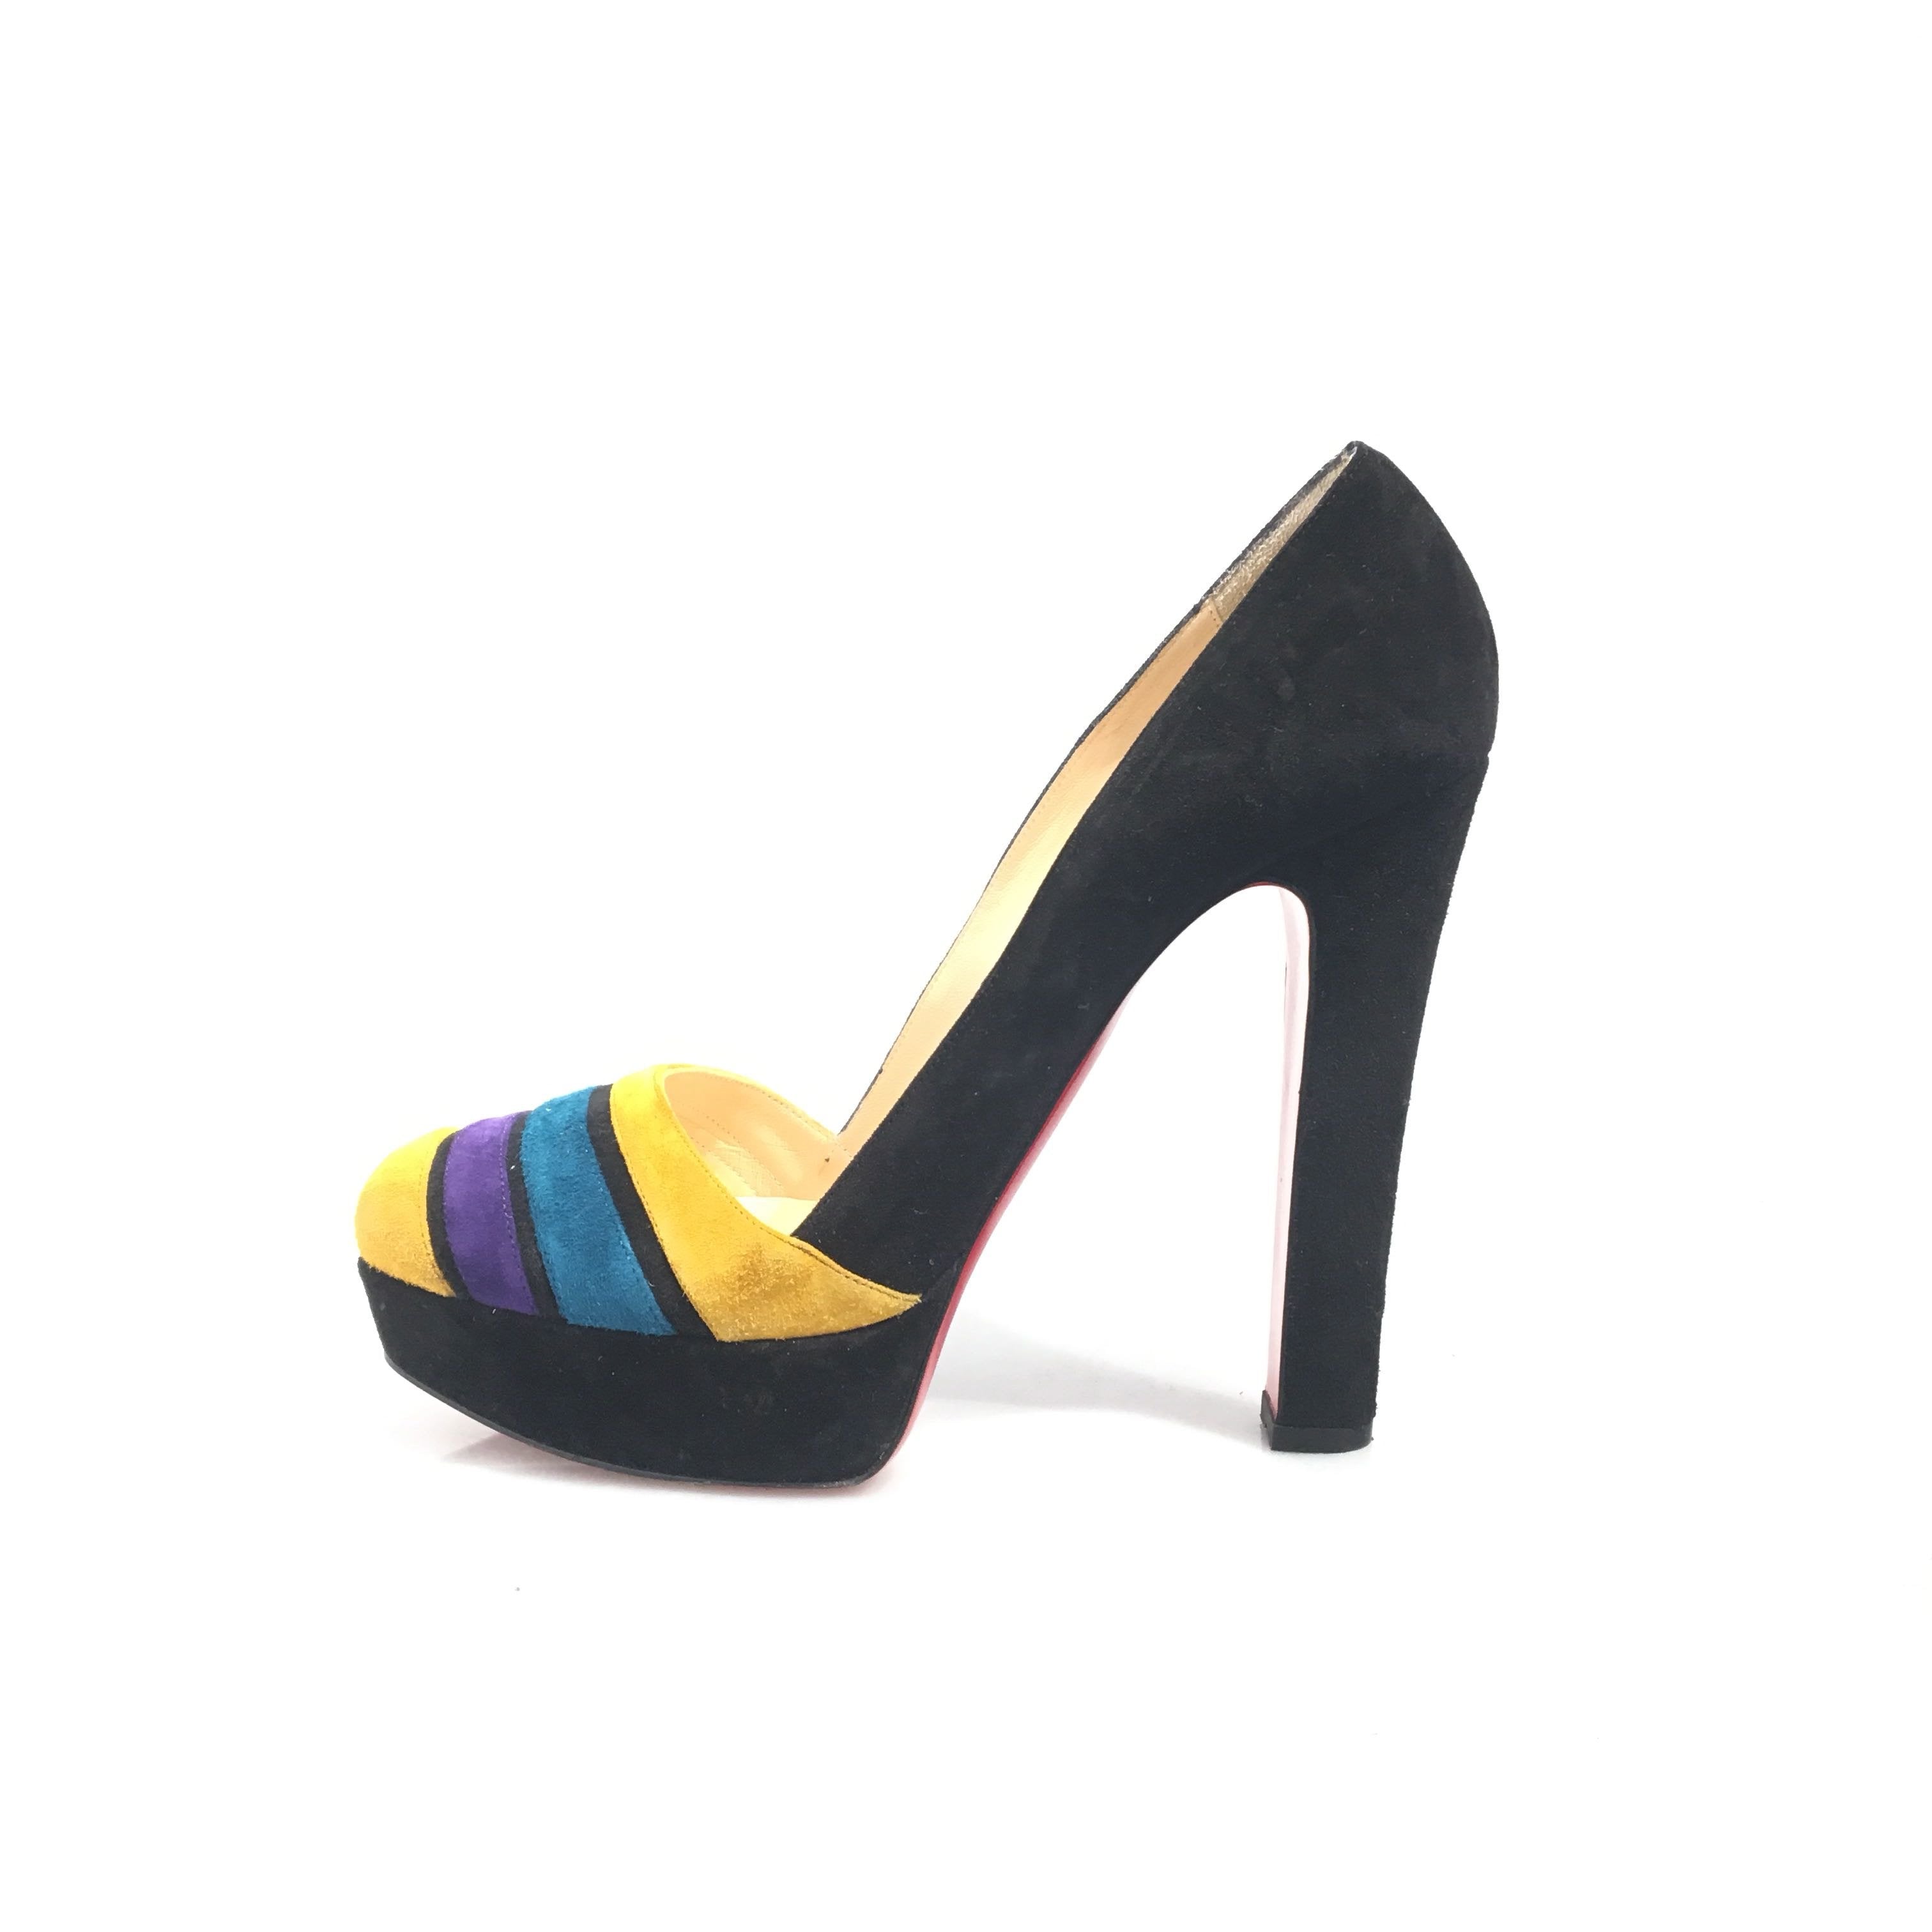 Buy & Consign Authentic Christian Louboutin Multi Colour Suede Pumps 39.5 at The Plush Posh